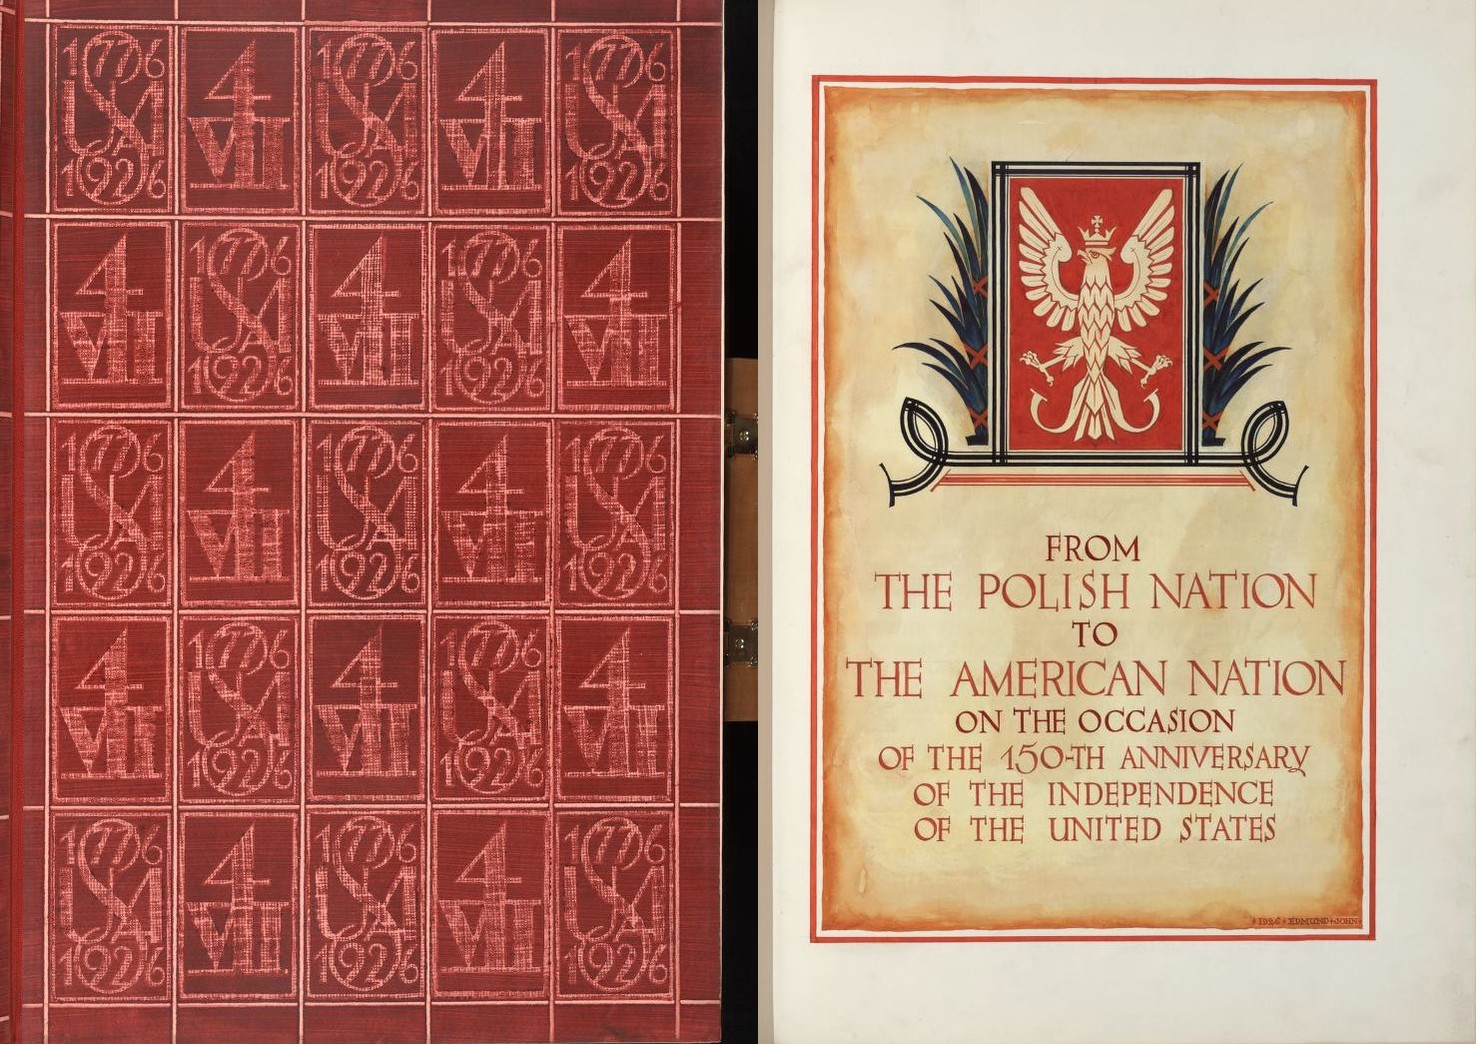 The cover and title page for the Polish declarations, which state "from the Polish nation to the American nation on the occasion of the 150th anniversary of the independence of the United States." (Library of Congress, Manuscript Division, Polish Declarations of Admiration and Friendship for the United States https://www.loc.gov/resource/pldec.001/?sp=3)